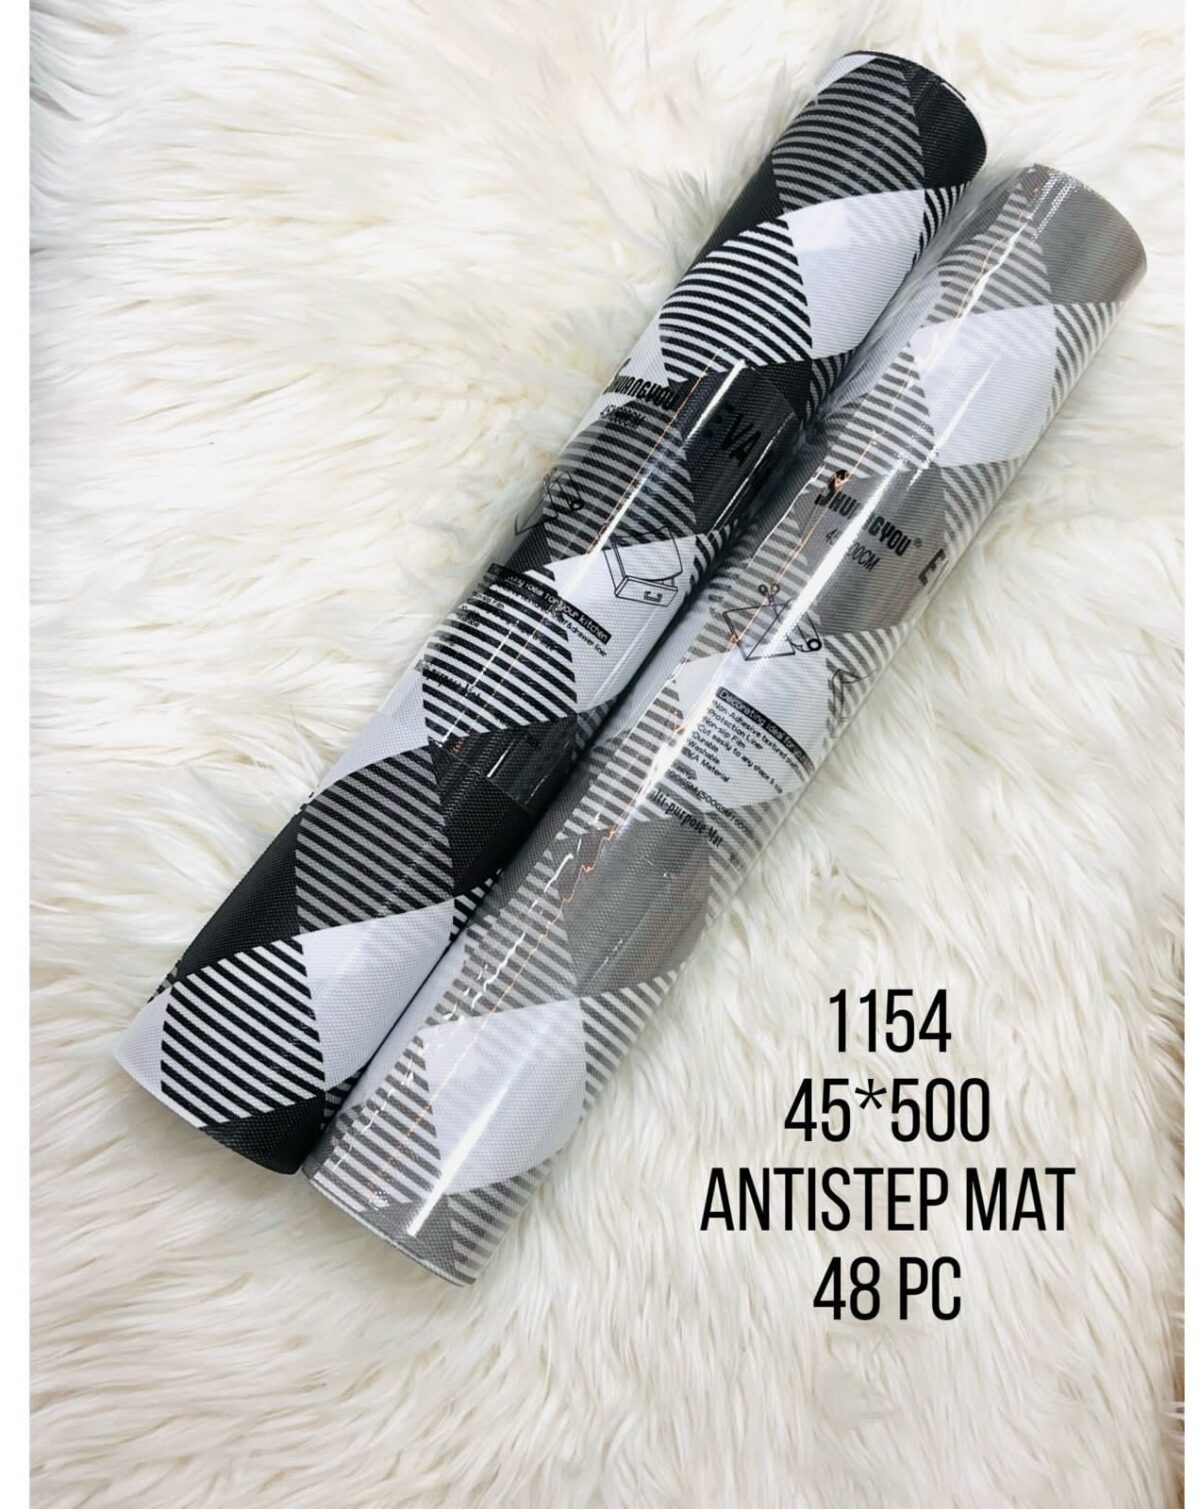 An "anti-slip mat roll (45*500cm)" is a roll of material that is 45 centimeters wide and 500 centimeters long, designed to provide a non-slip surface. It is commonly used to line drawers, shelves, or other surfaces to prevent items from sliding and to increase stability.